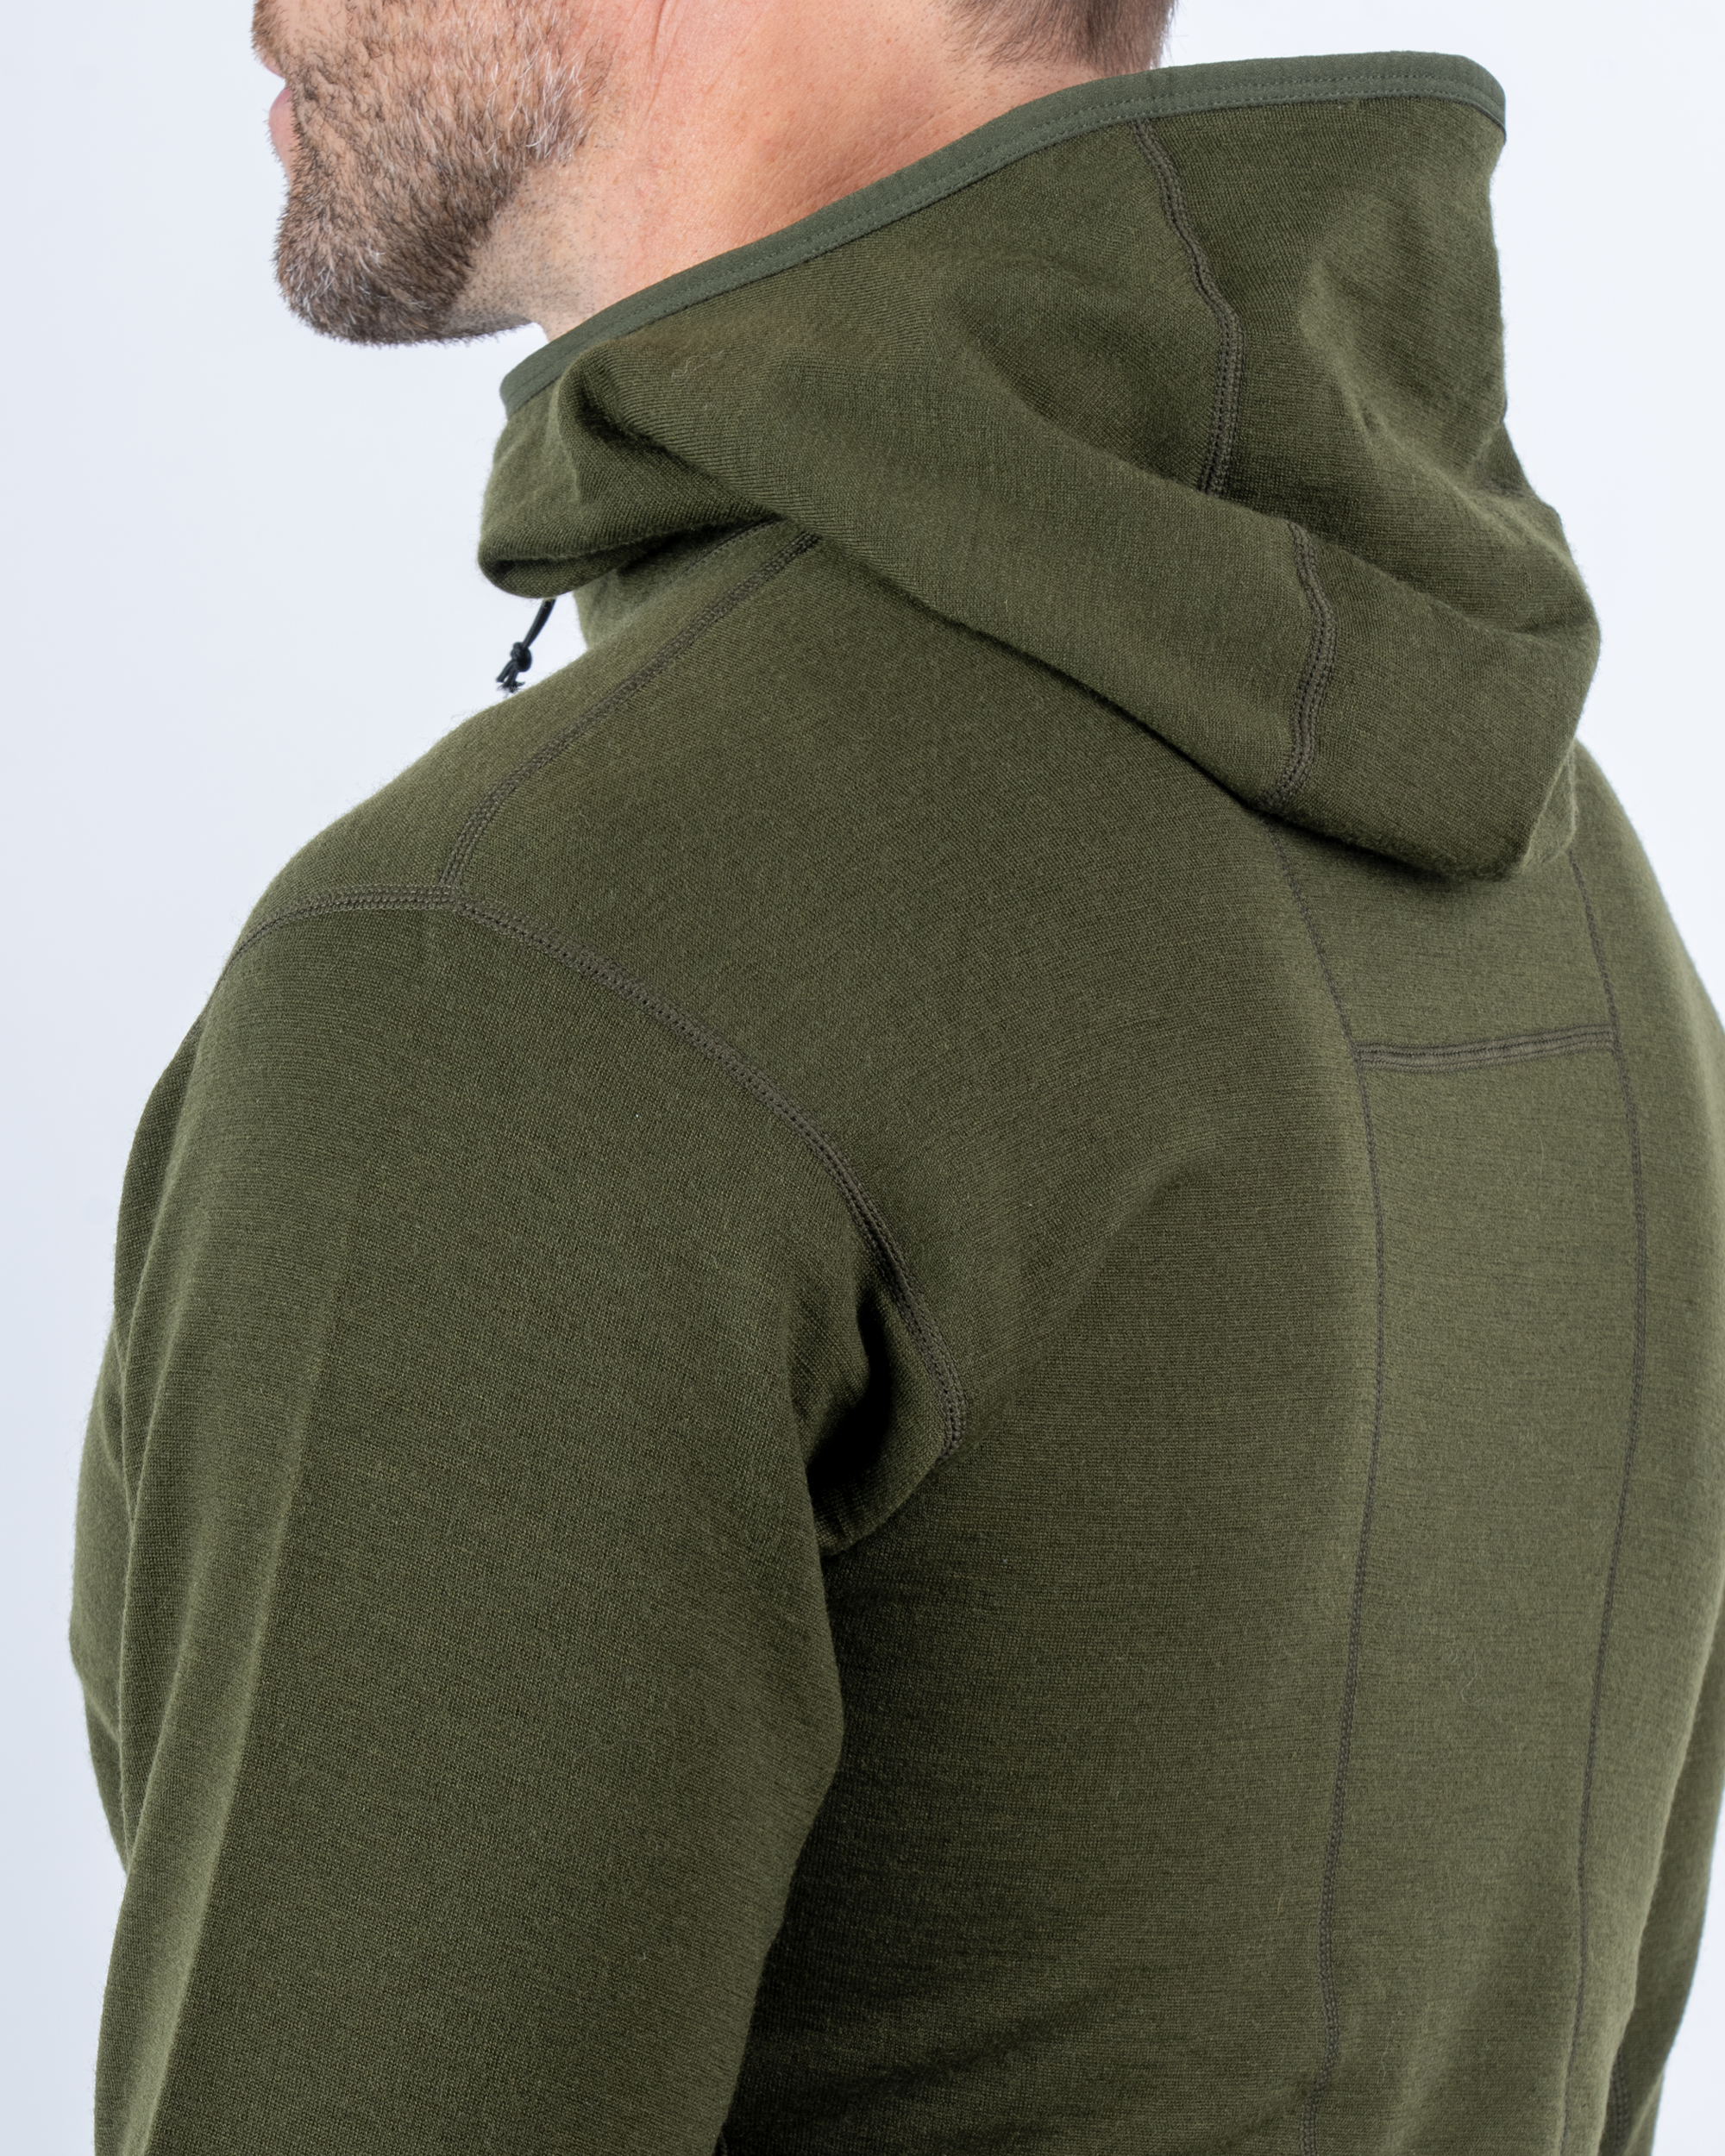 Foreign Rider Co Nuyarn Merino Wool Olive Hooded Jacket Back Shoulder and Hood Detail